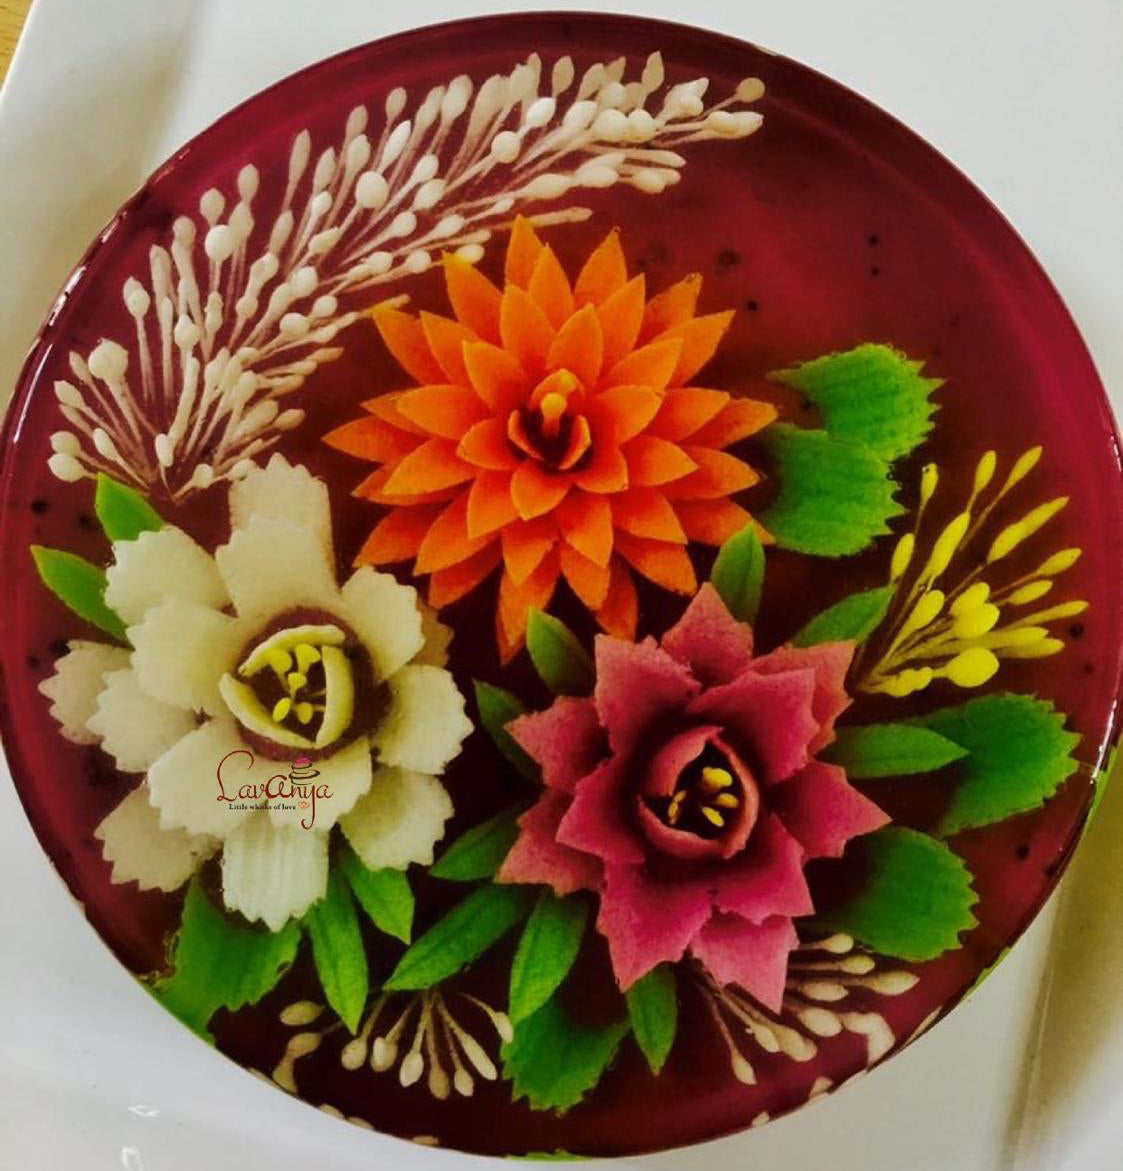 Confectionary Artist Creates 3D Jelly Cakes That Are Blooming on Plates